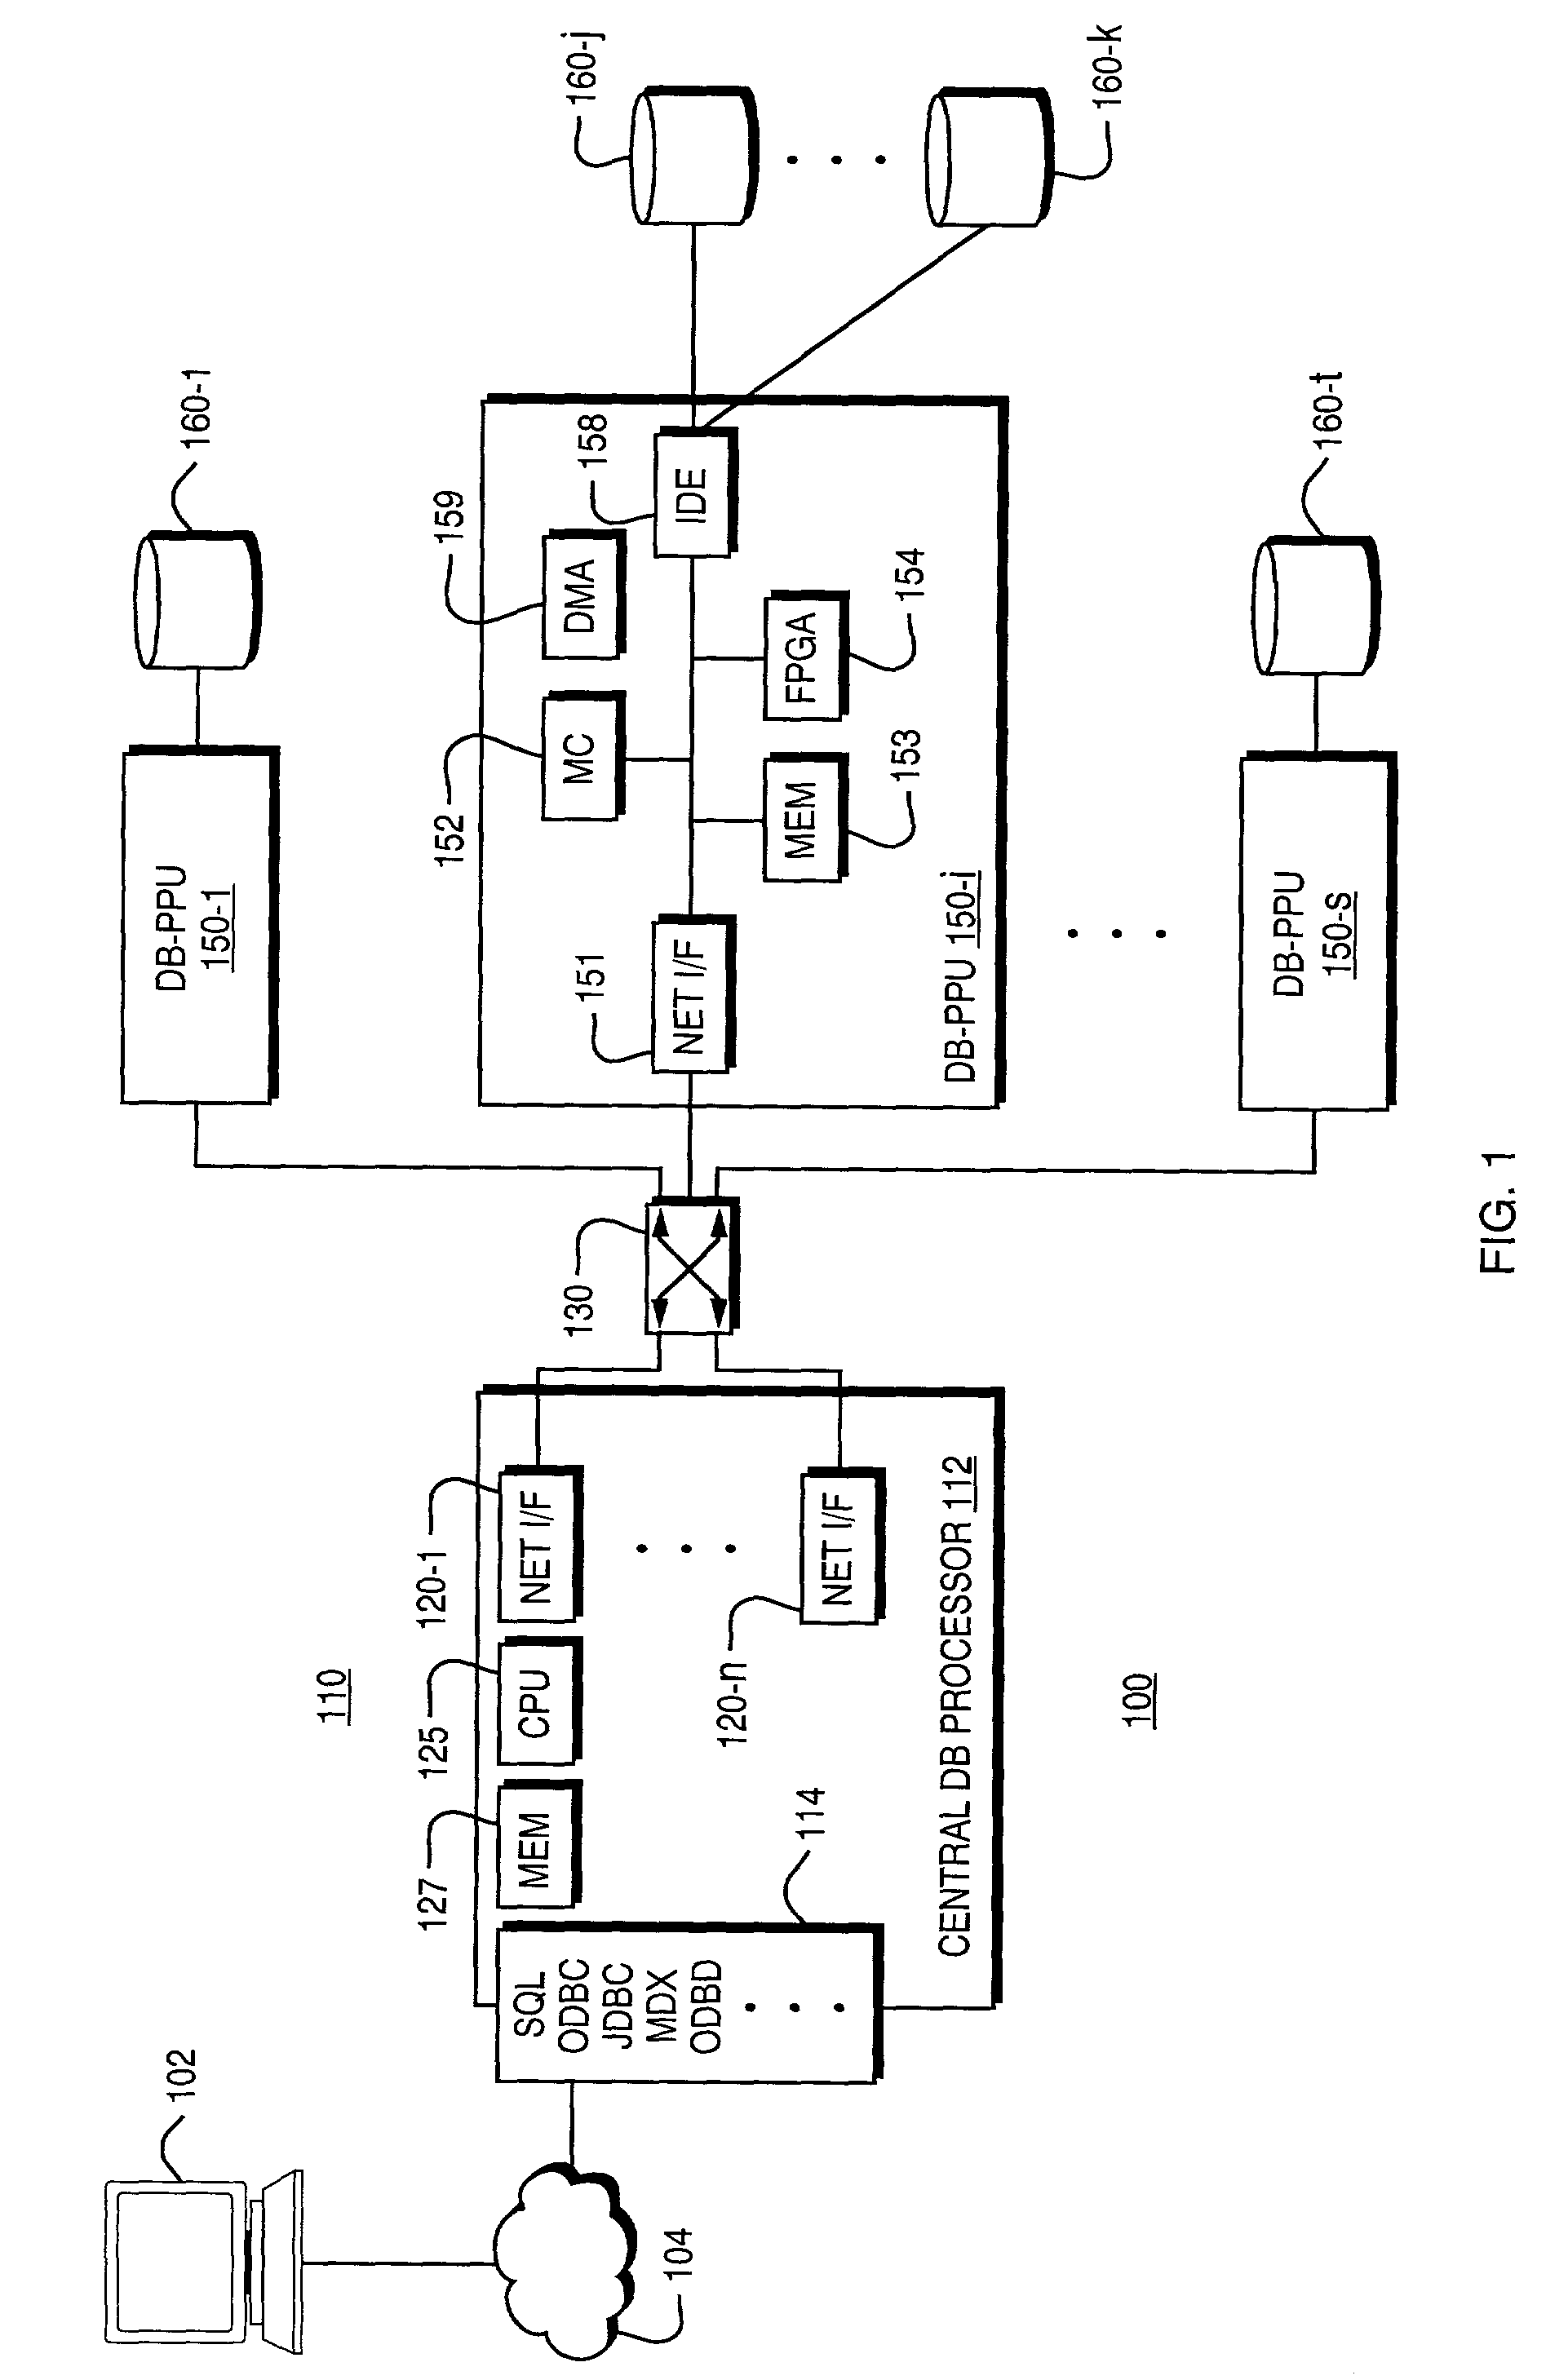 Network interface for distributed intelligence database system